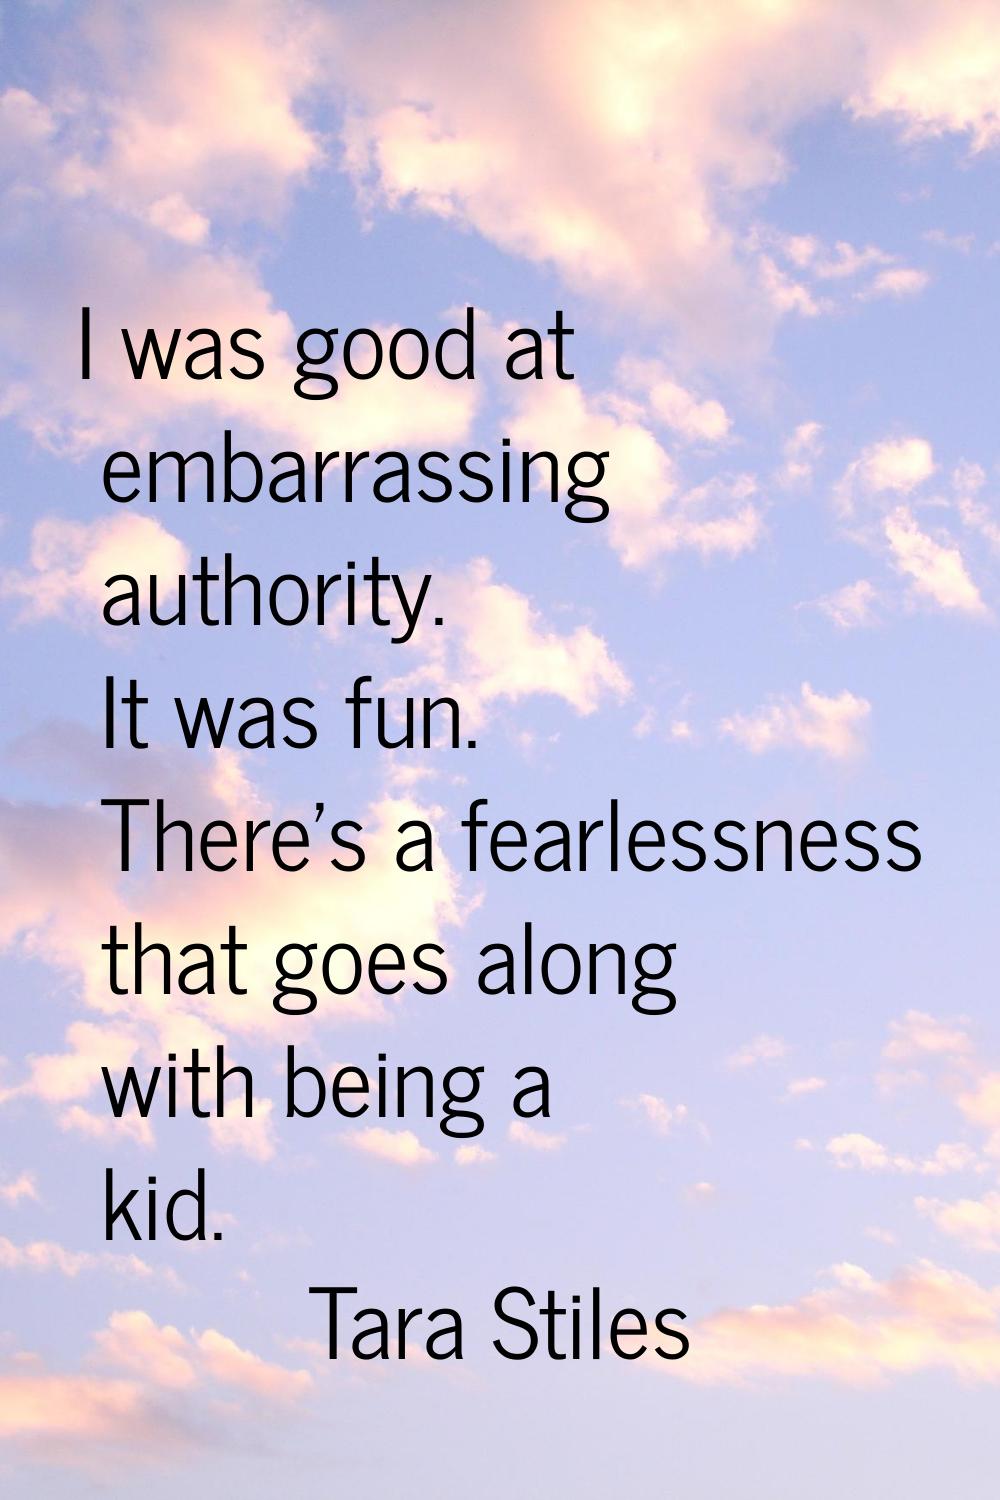 I was good at embarrassing authority. It was fun. There's a fearlessness that goes along with being